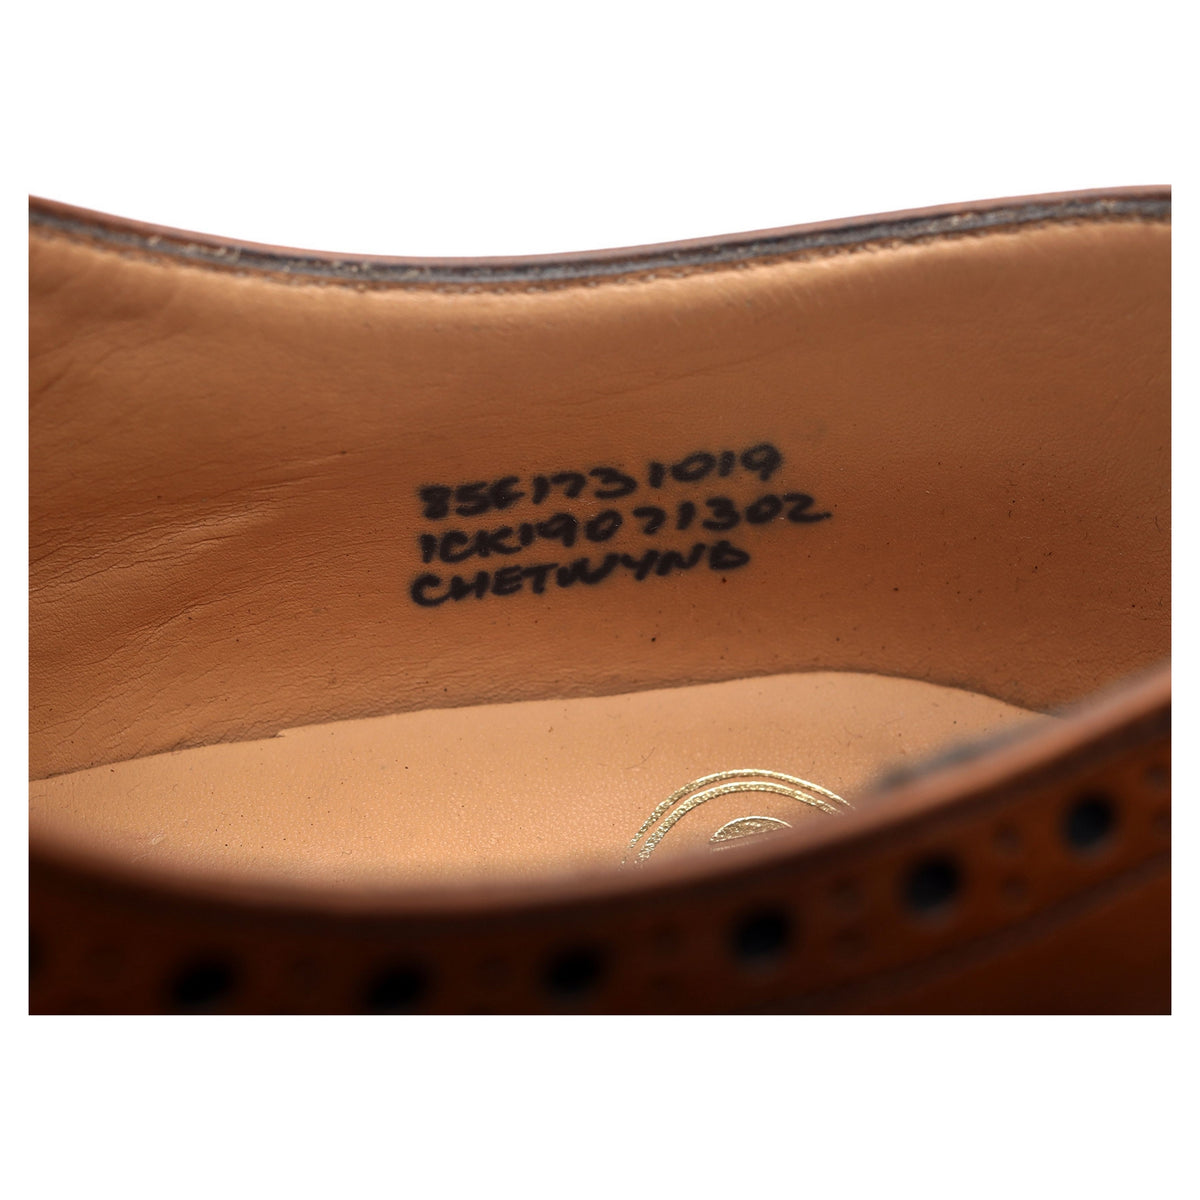 &#39;Chetwynd&#39; Tan Brown Leather Brogues UK 8.5 F